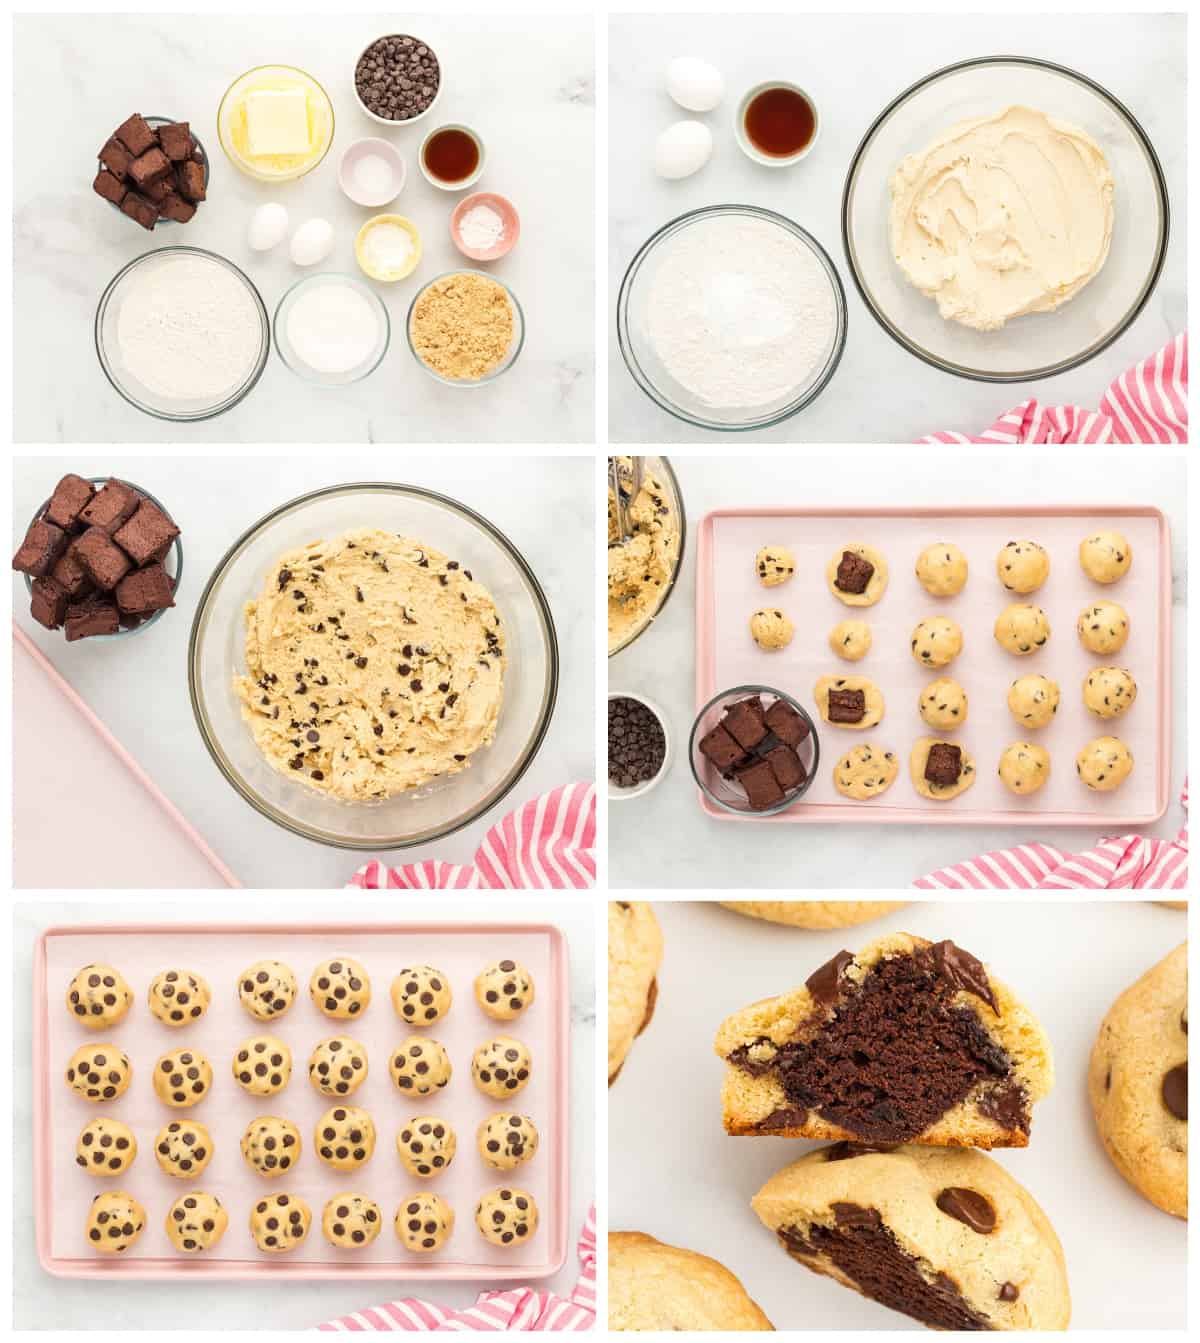 how to make brownie stuffed chocolate chip cookies step by step photo instructions